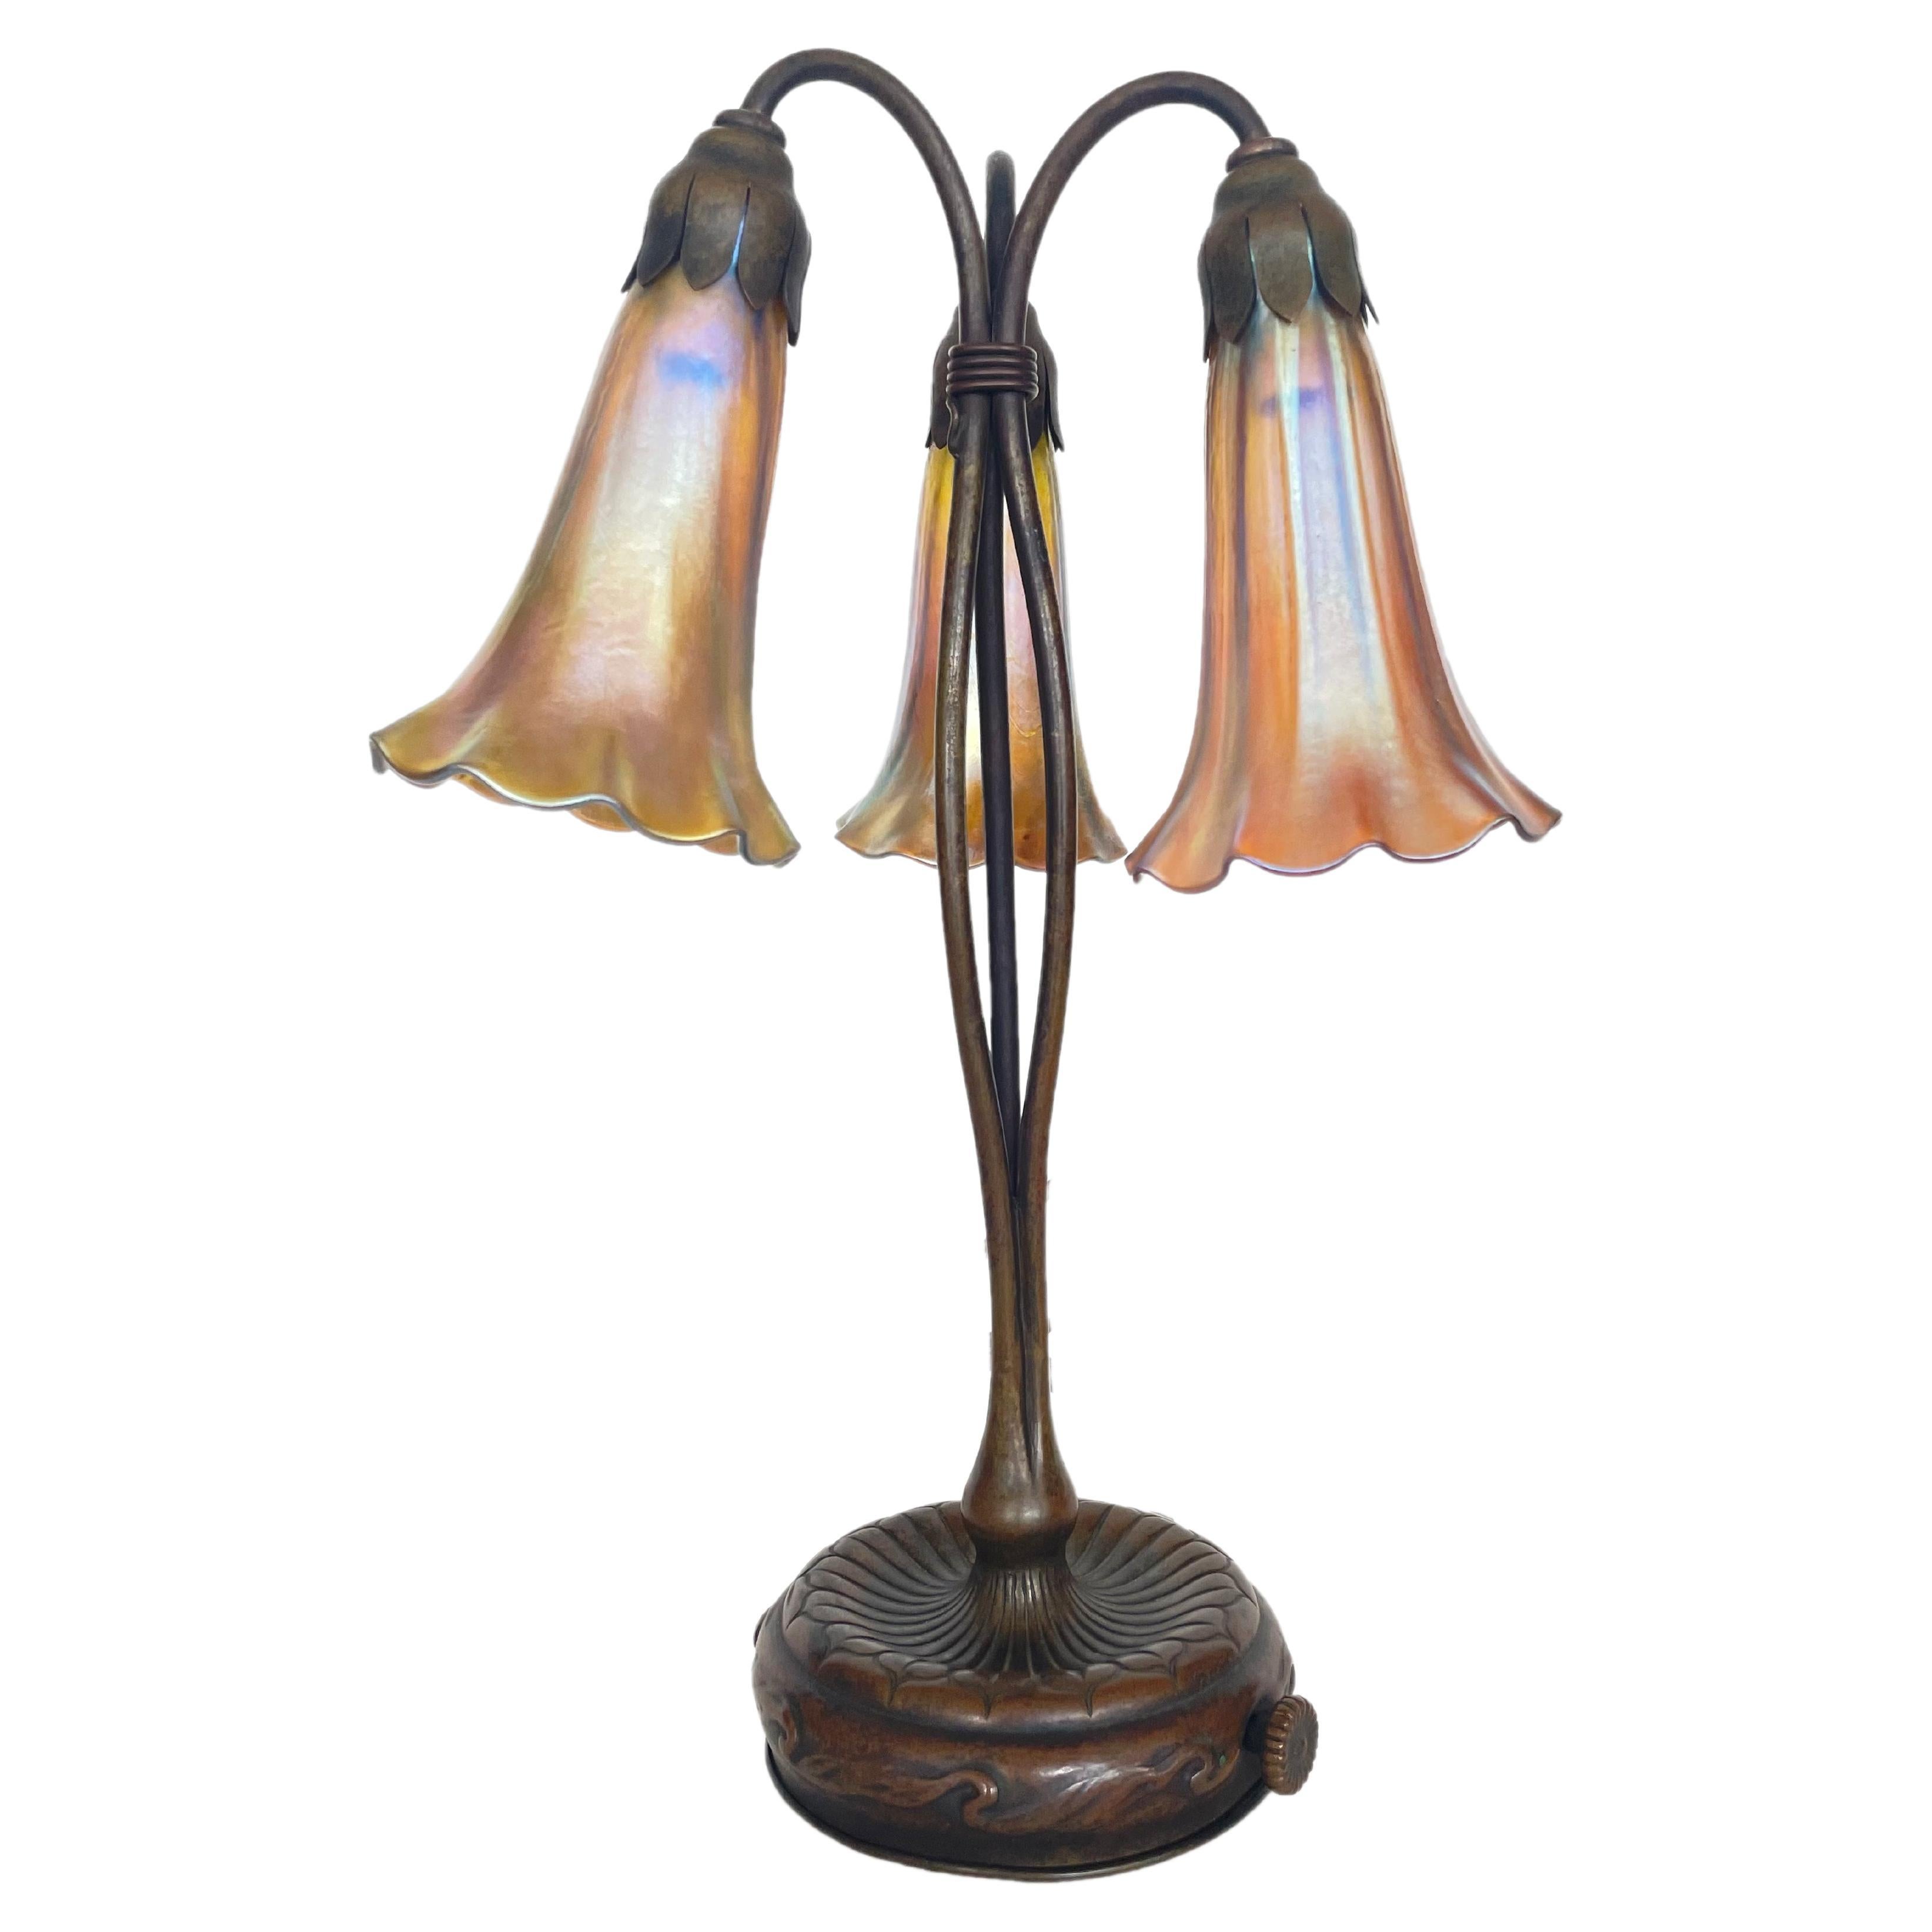 Early 20th Century Art Nouveau Shower Lily Desk Lamp by, Tiffany Studios